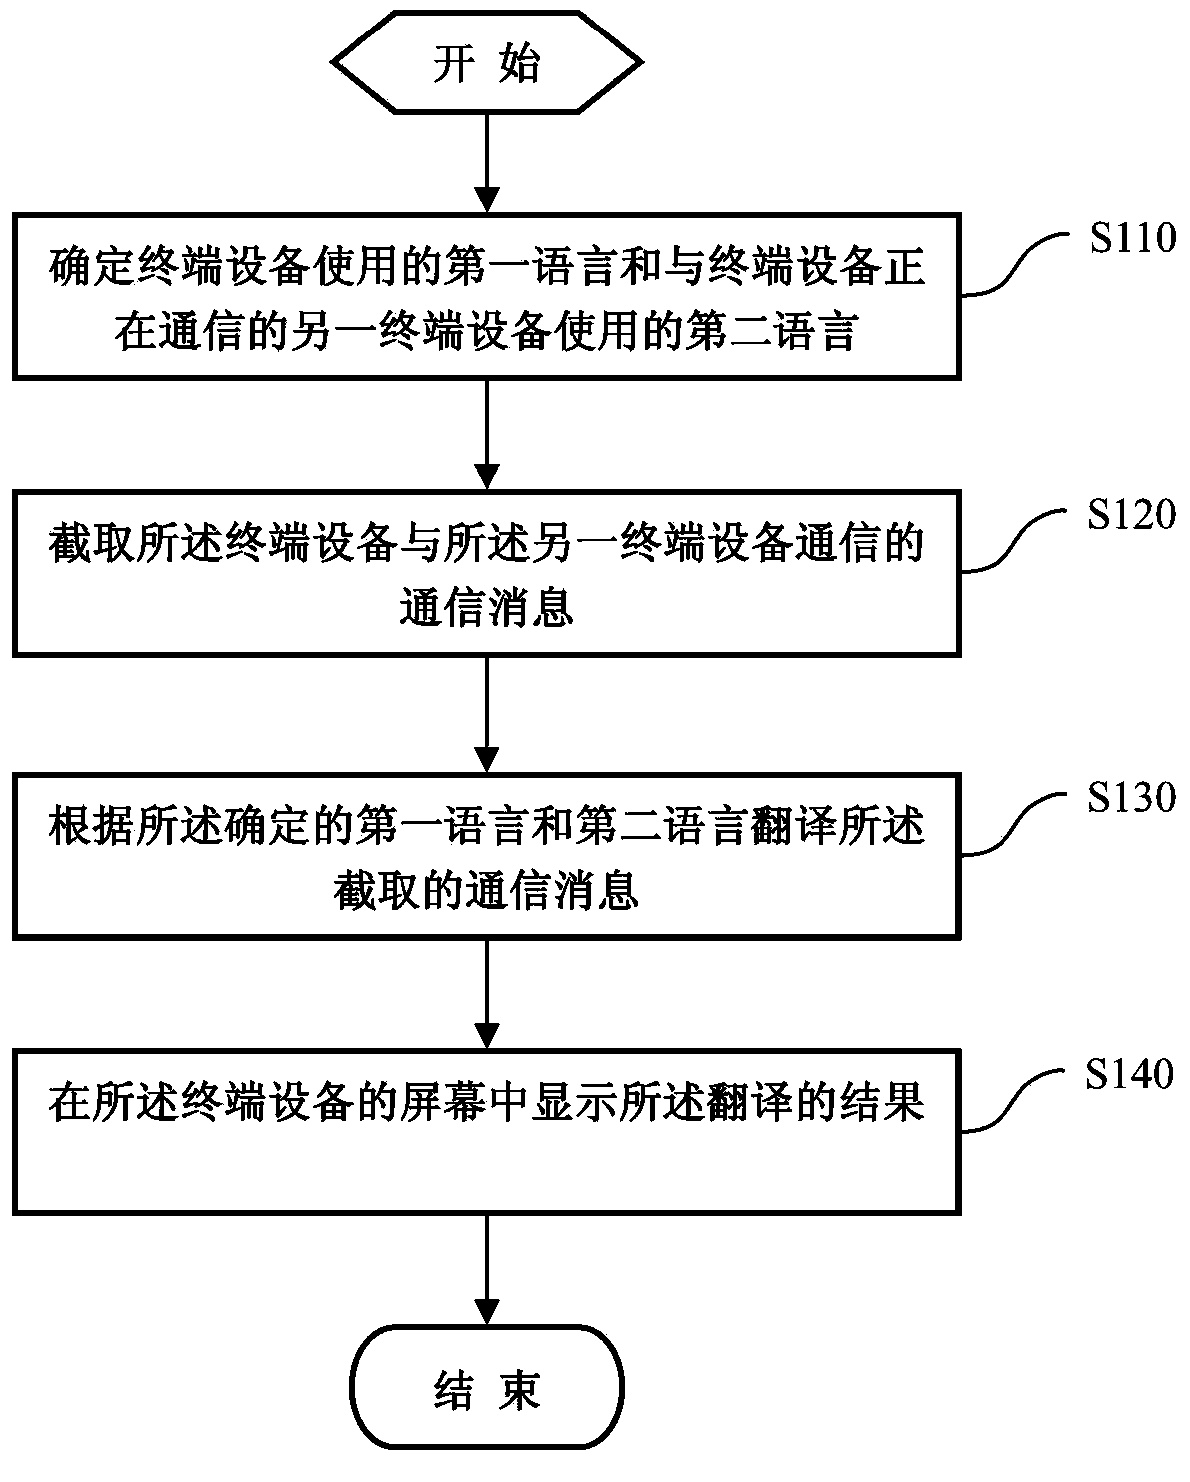 Method and device for translating messages